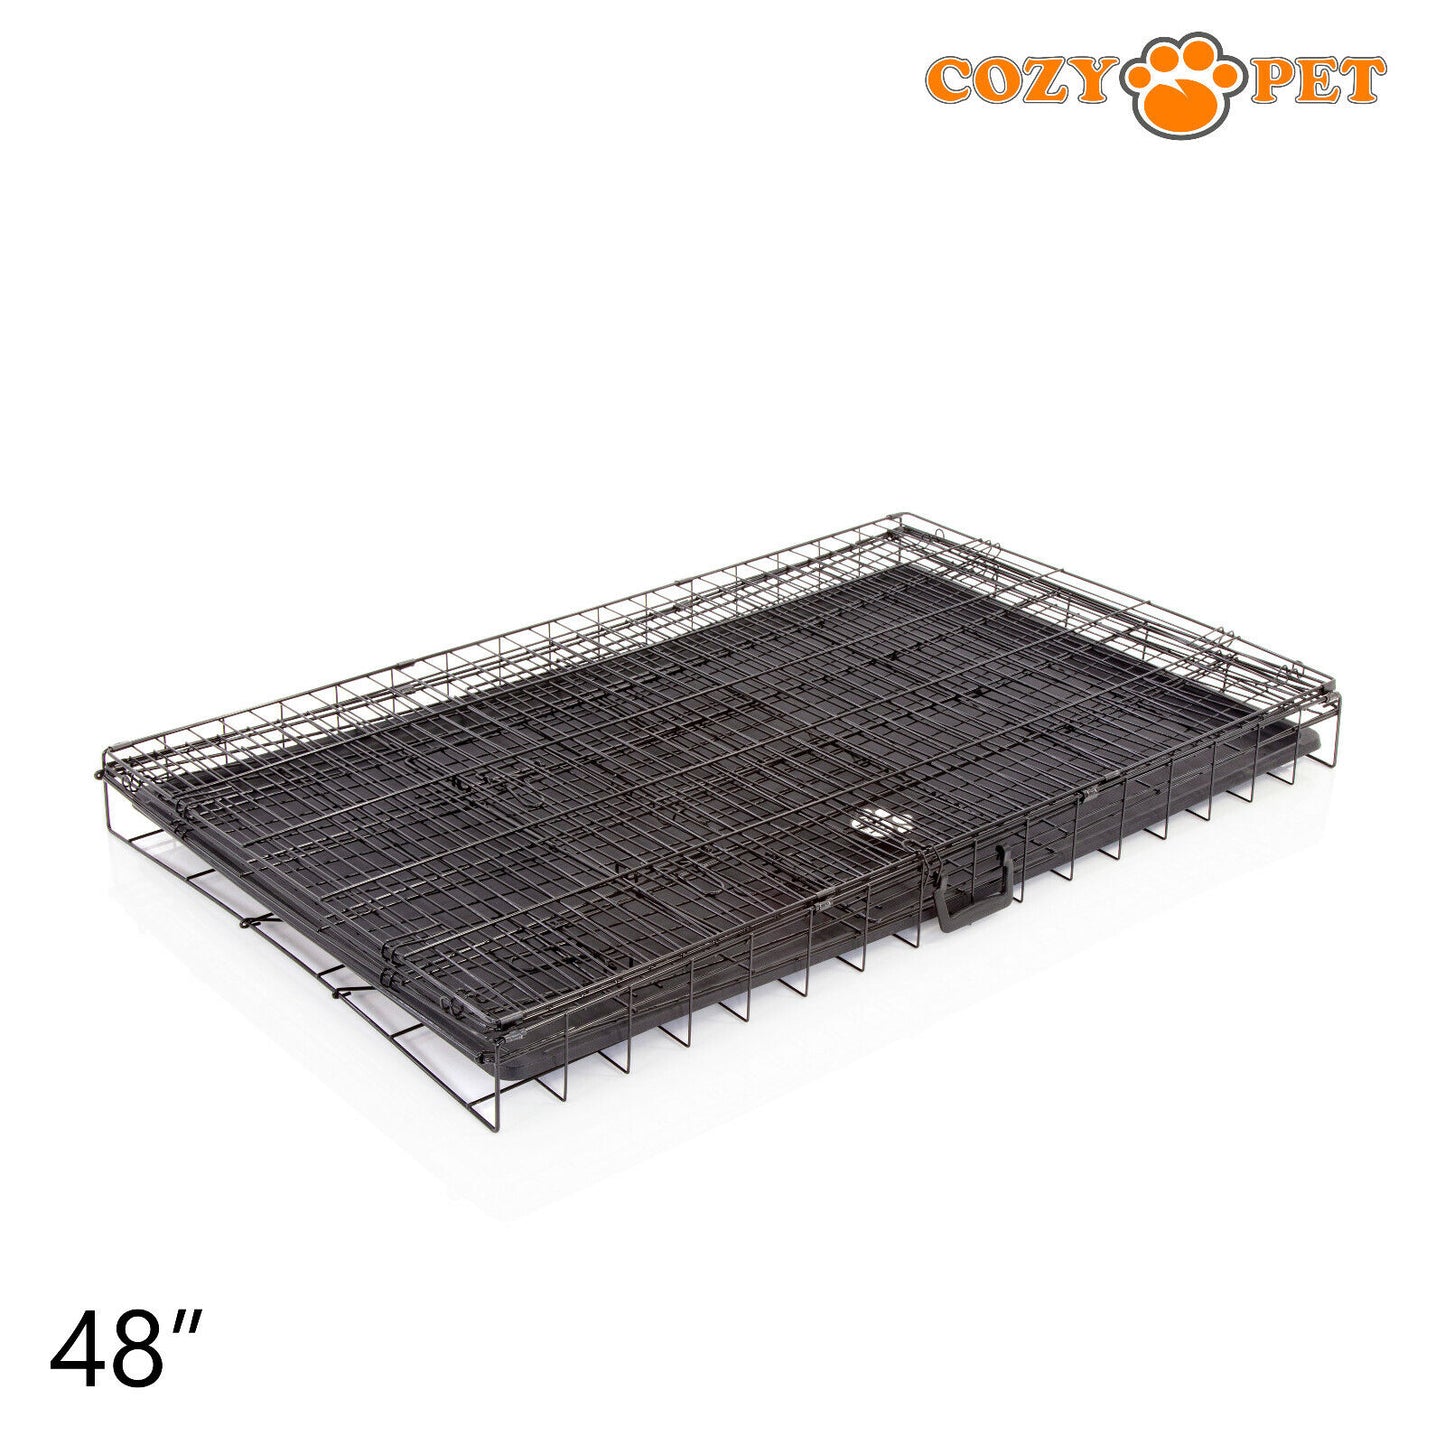 Dog Cage 48 Inch Puppy Crate XXL Cozy Pet Black Dog Crates Folding Metal Cages